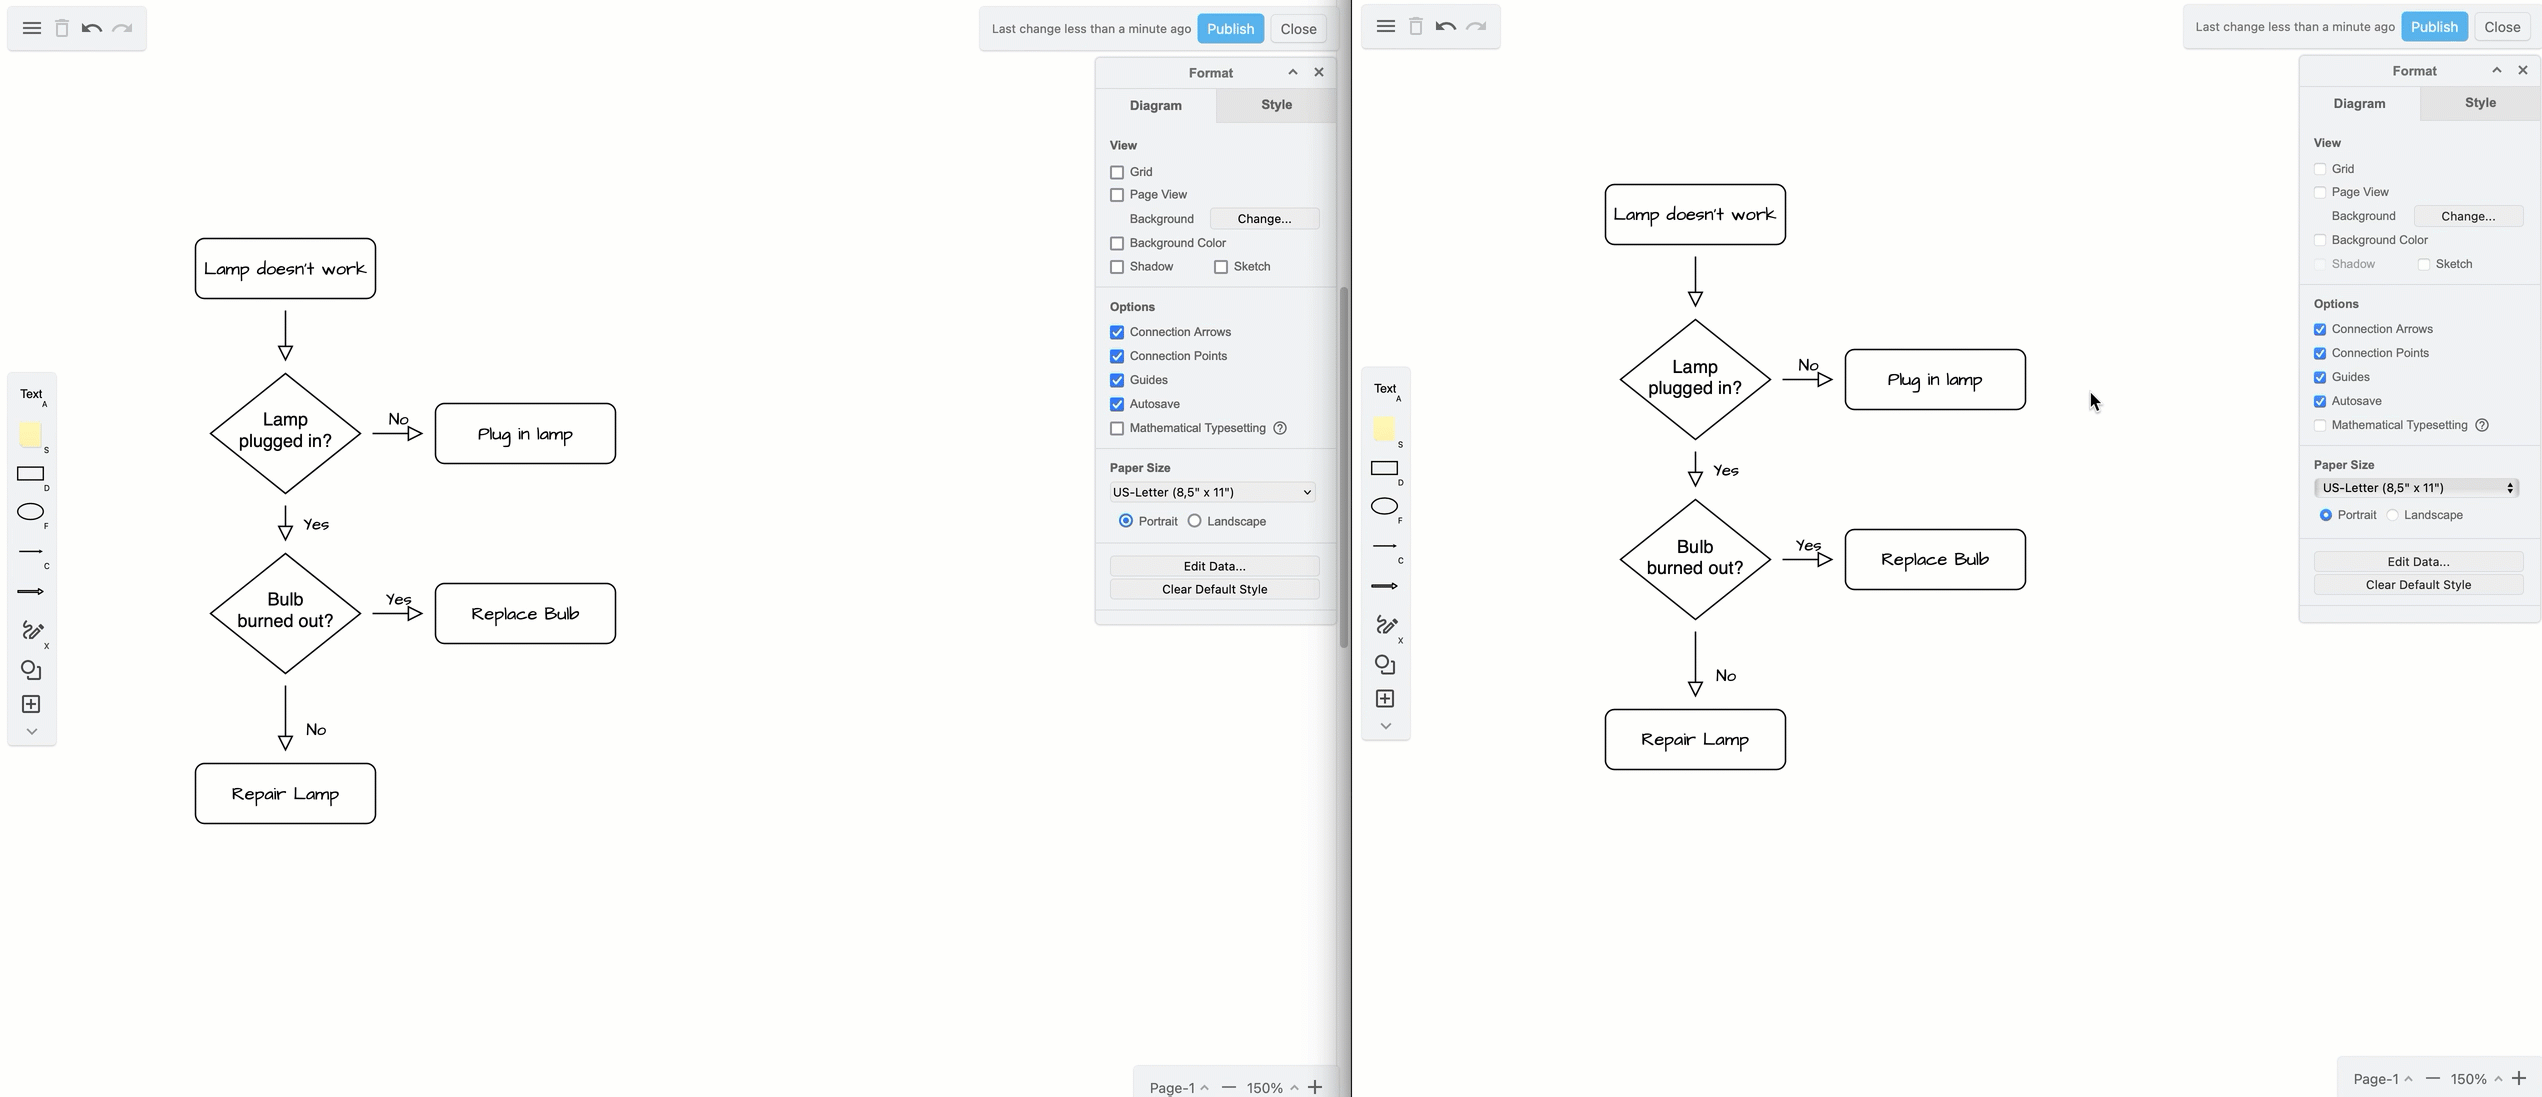 Collaborative editing is available in draw.io for Confluence DC (version 8.x)